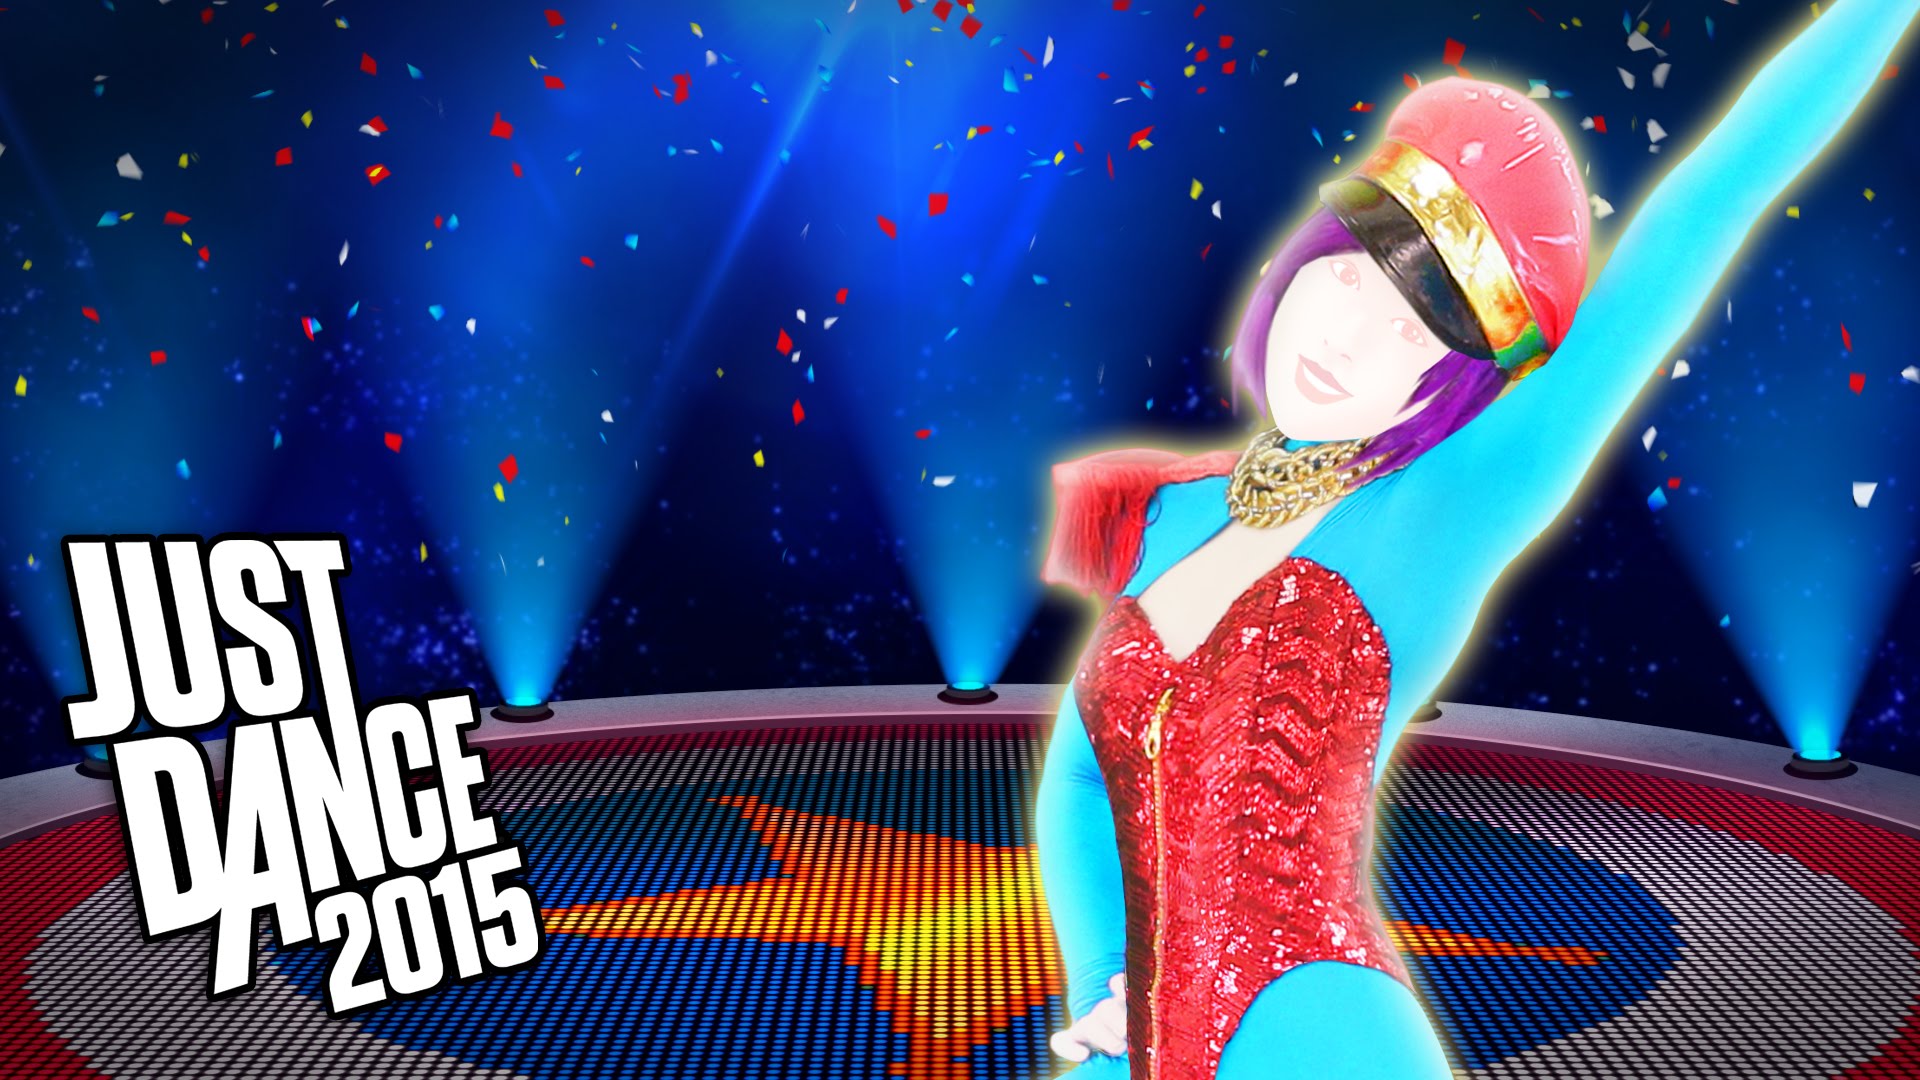 Just 2015. Just Dance. Джаст дэнс 2015. Just Dance игра 2023. Джаст дэнс 4.